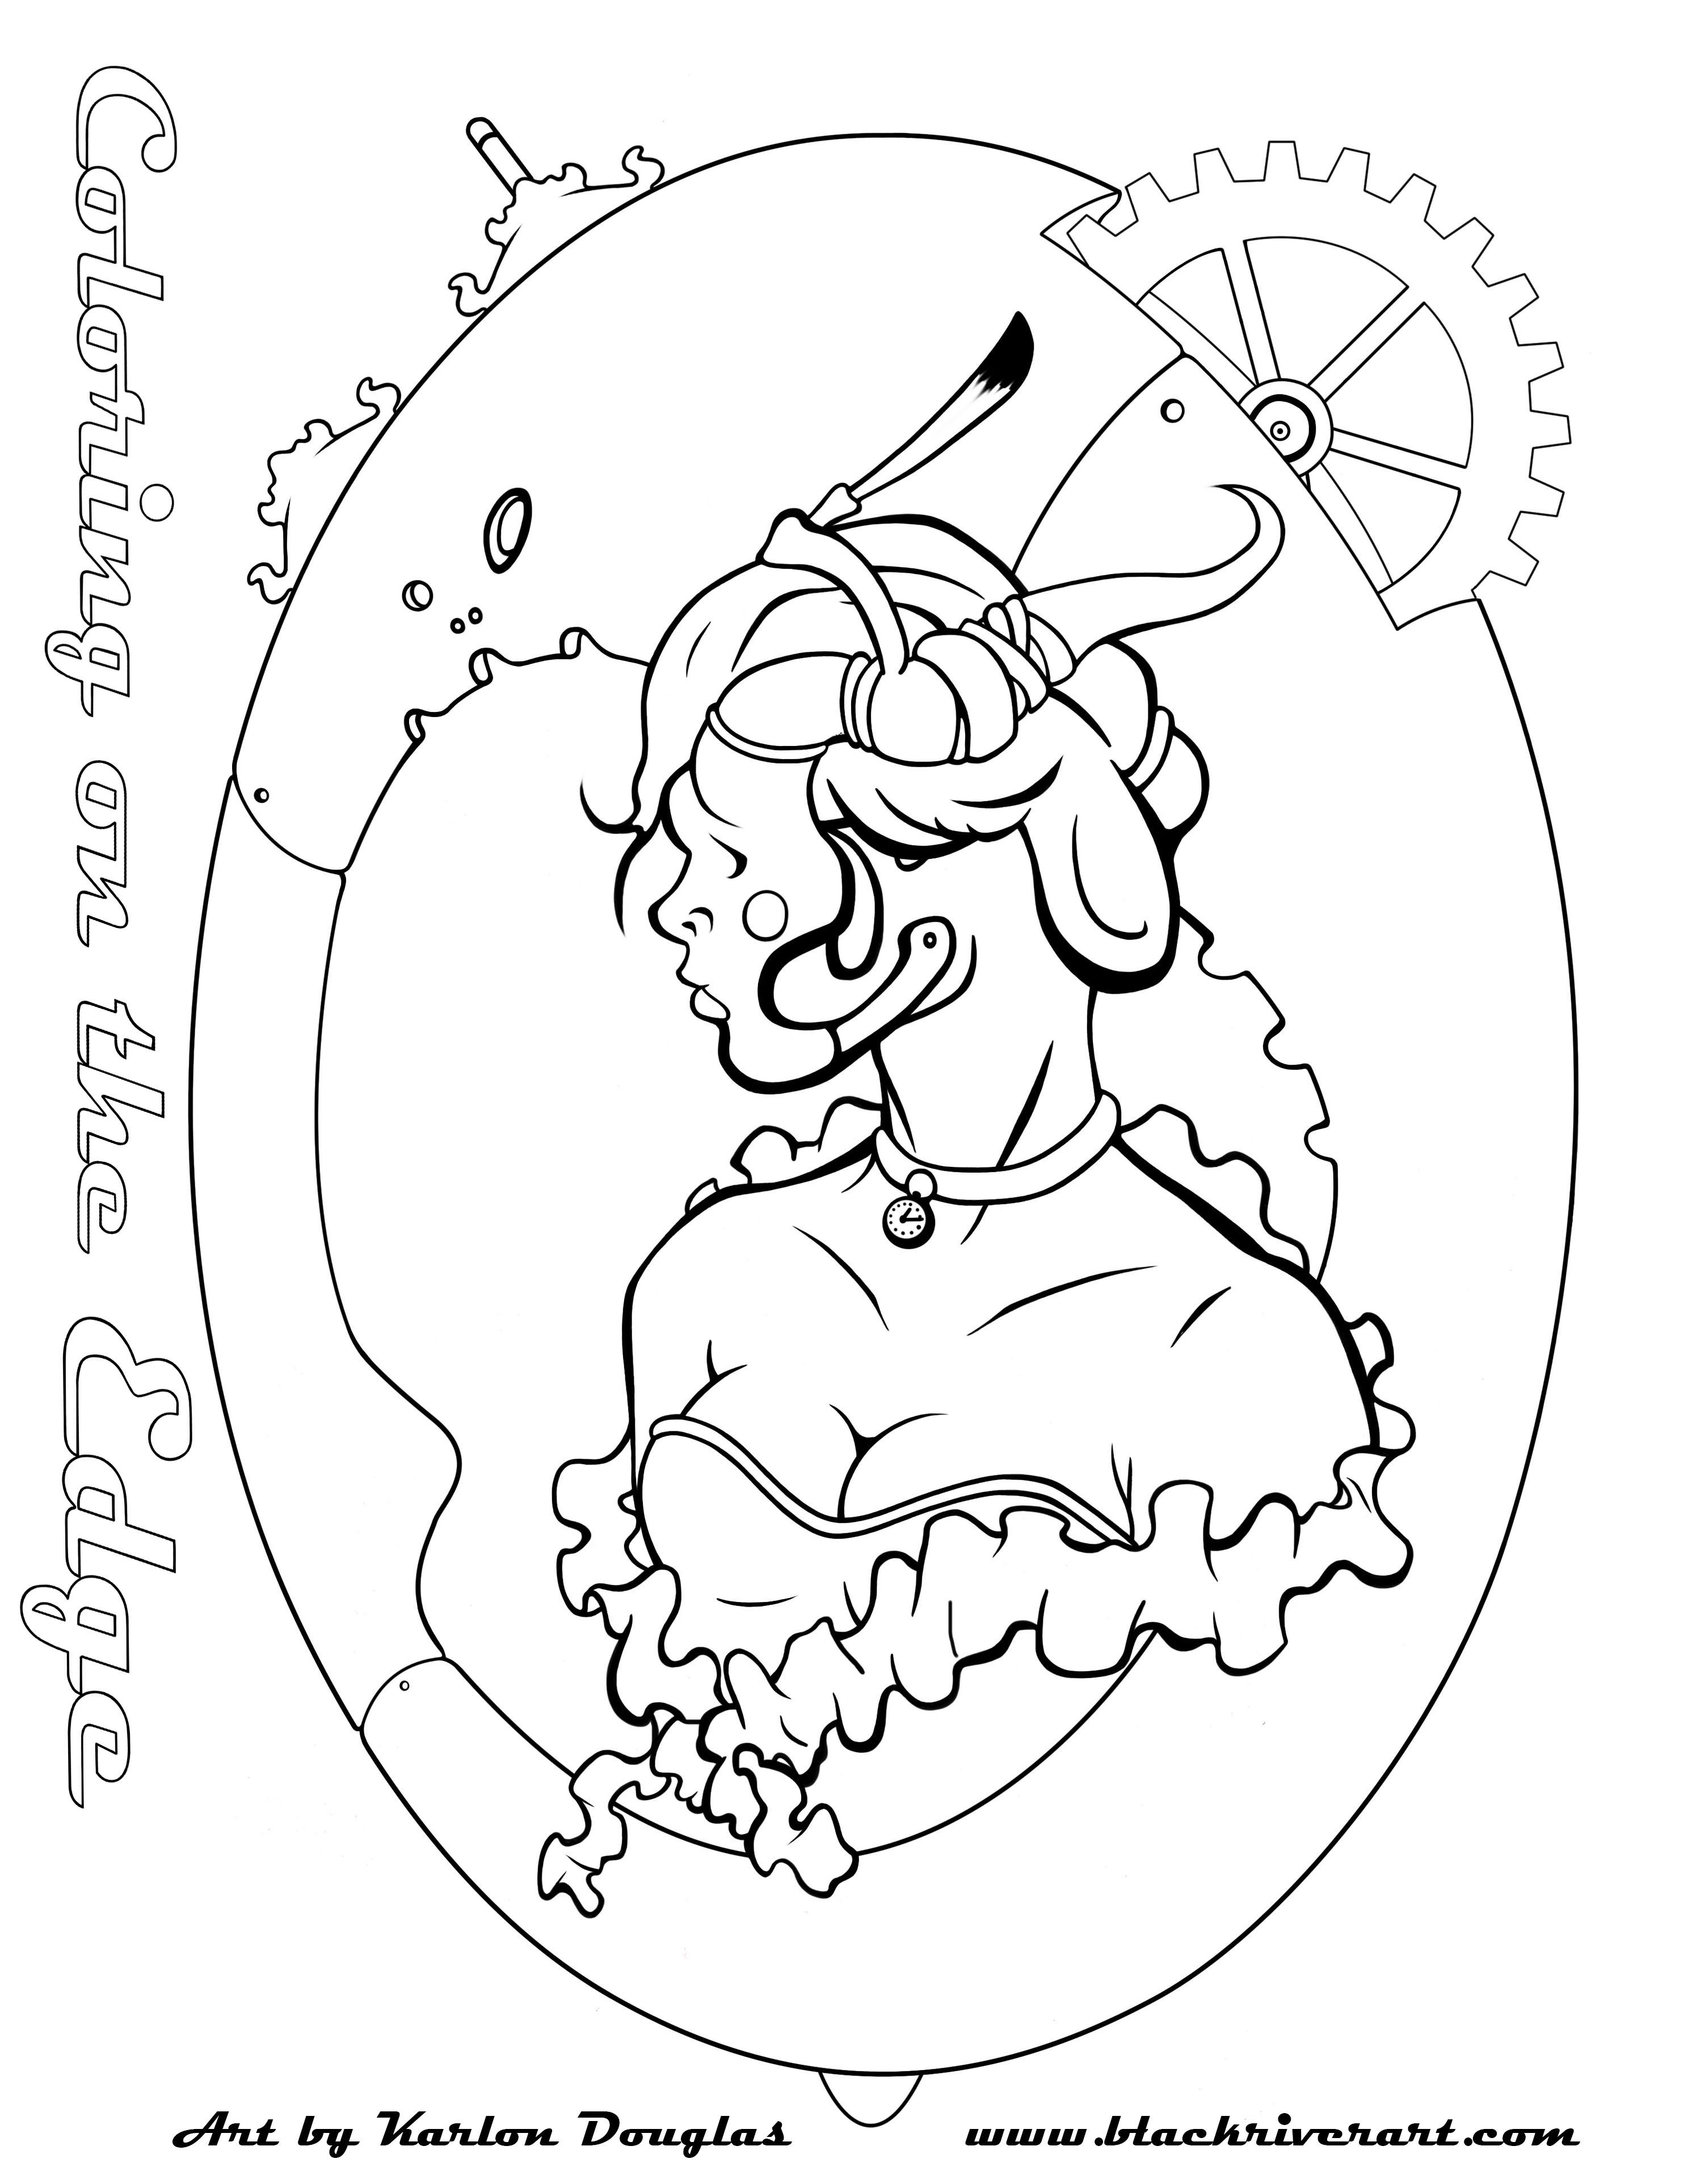 Free Coloring book pages for adults - Coloring Book Addict